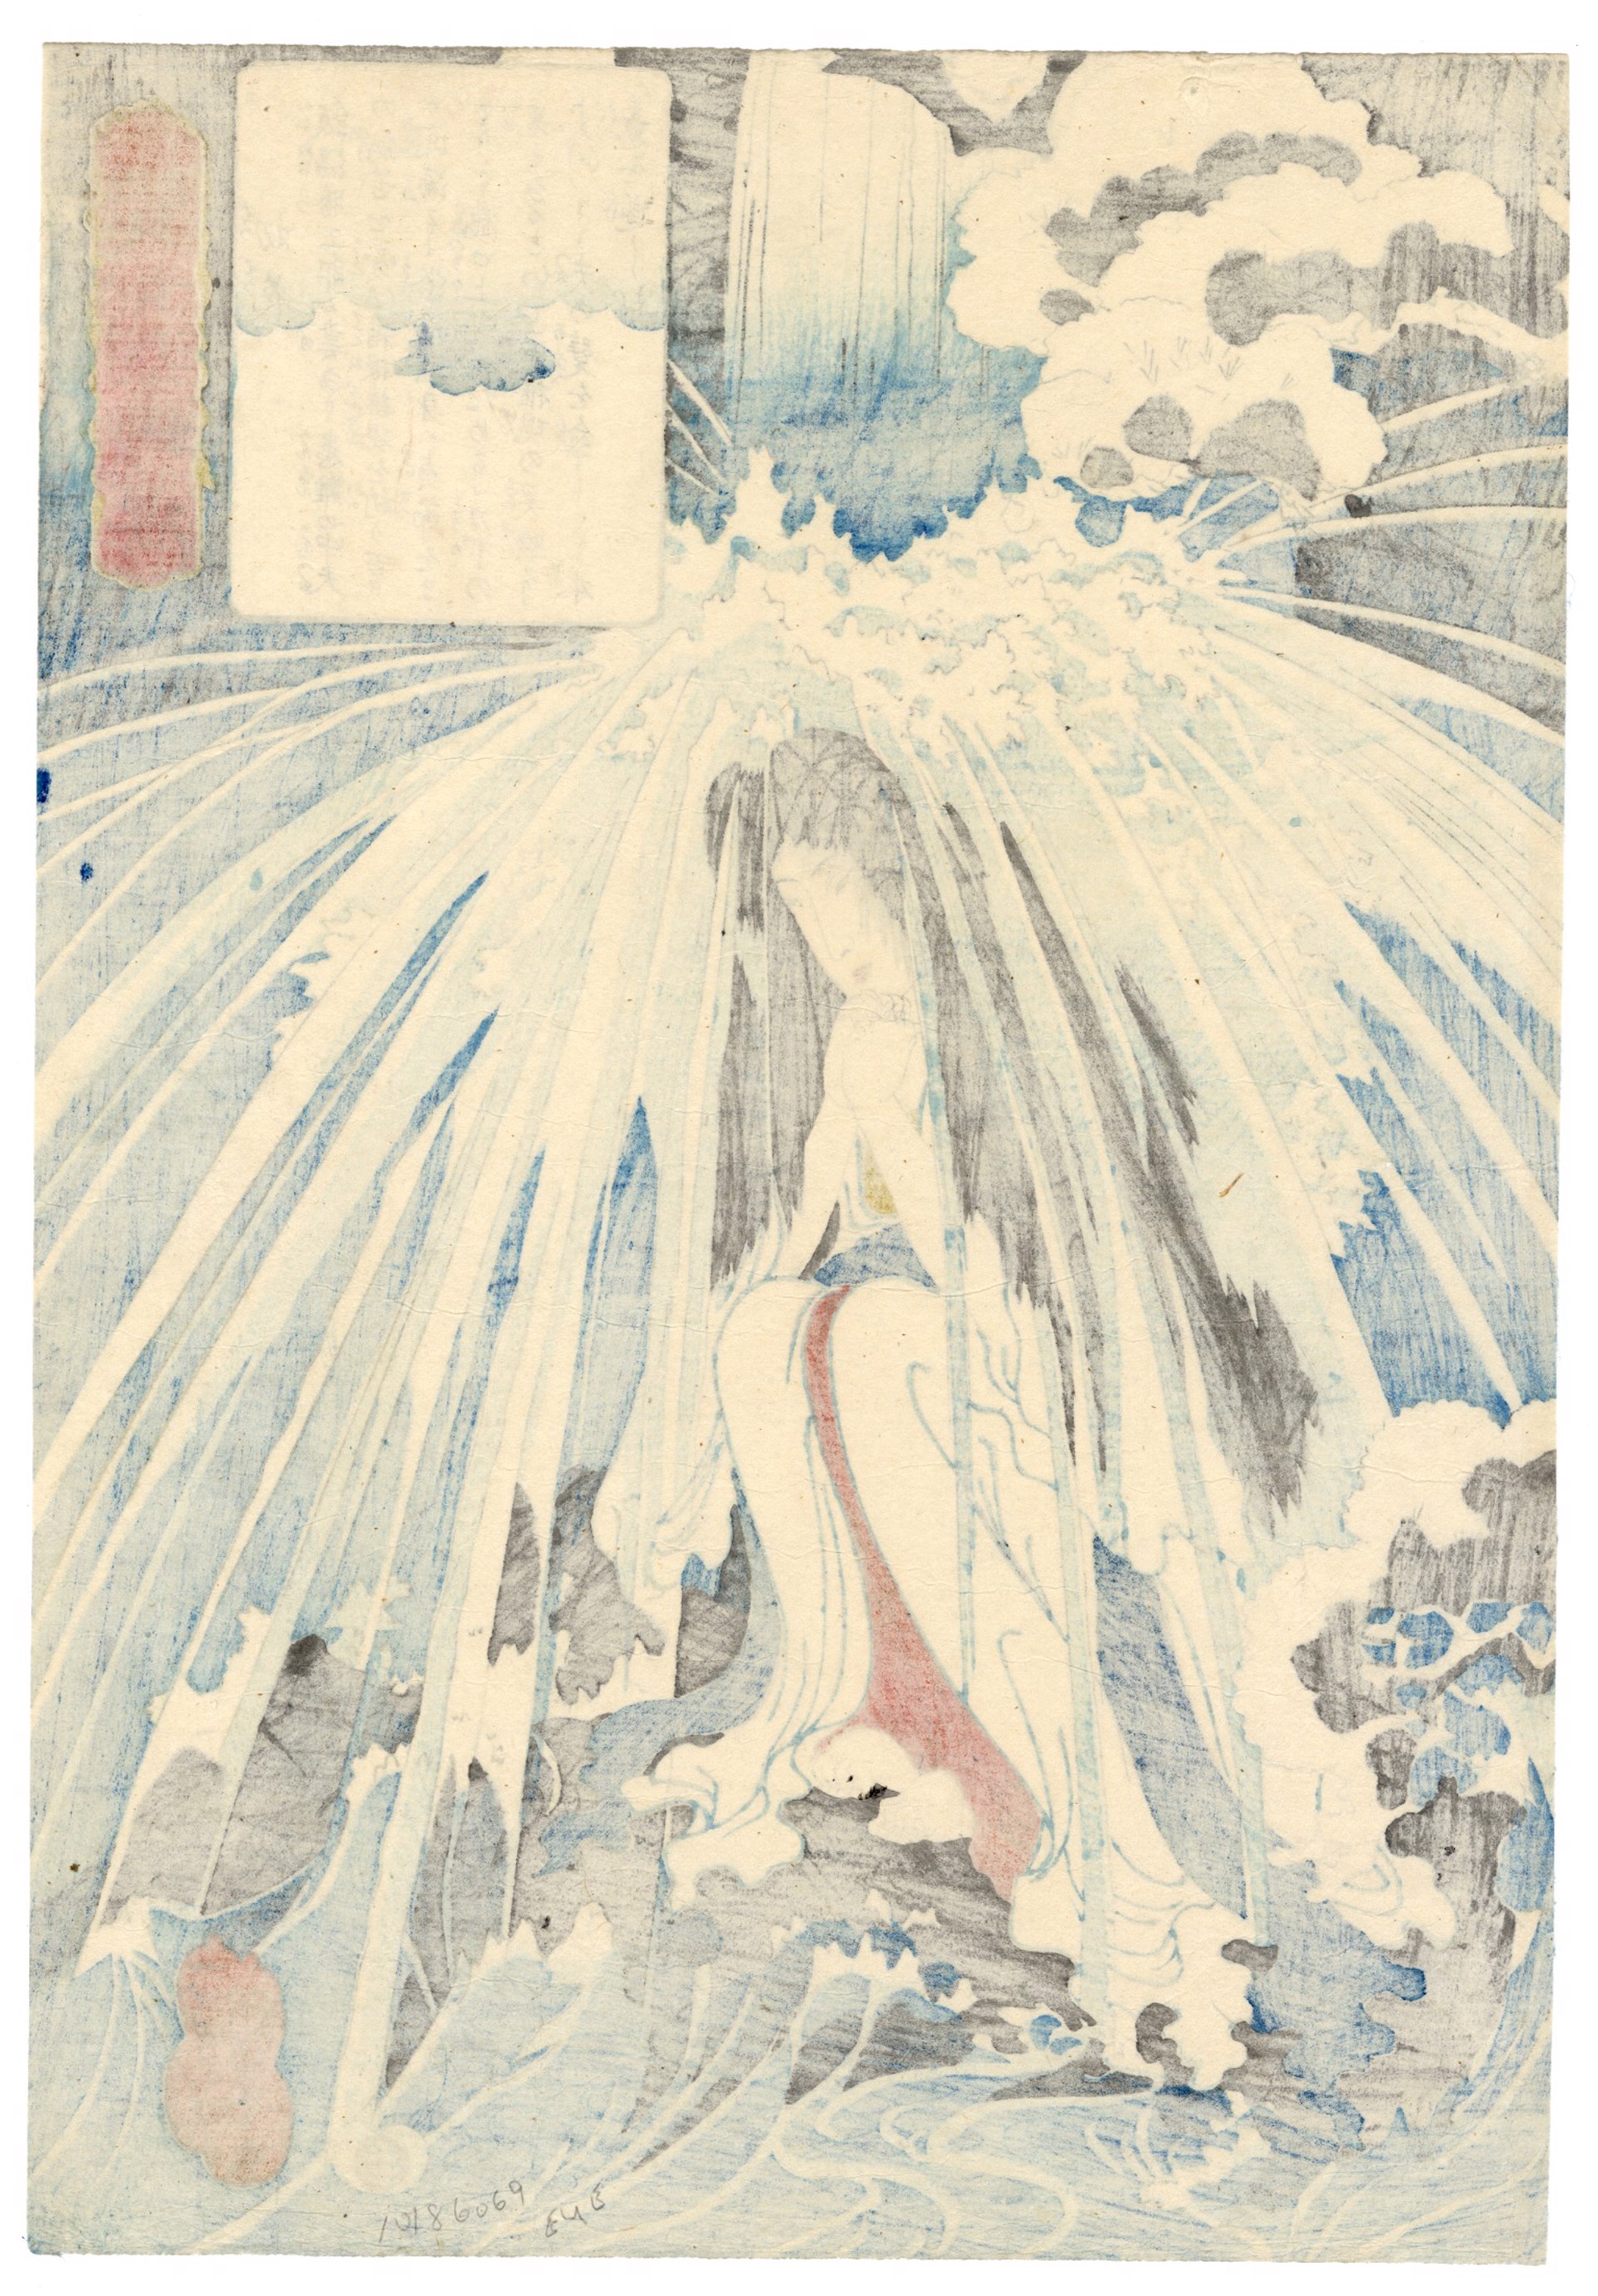 Hatsuhana in Prayer Under Gongun Waterfall Which Resulted in Curing Her Crippled Husband Stories of Wise Women and Faithful Wives by Kuniyoshi